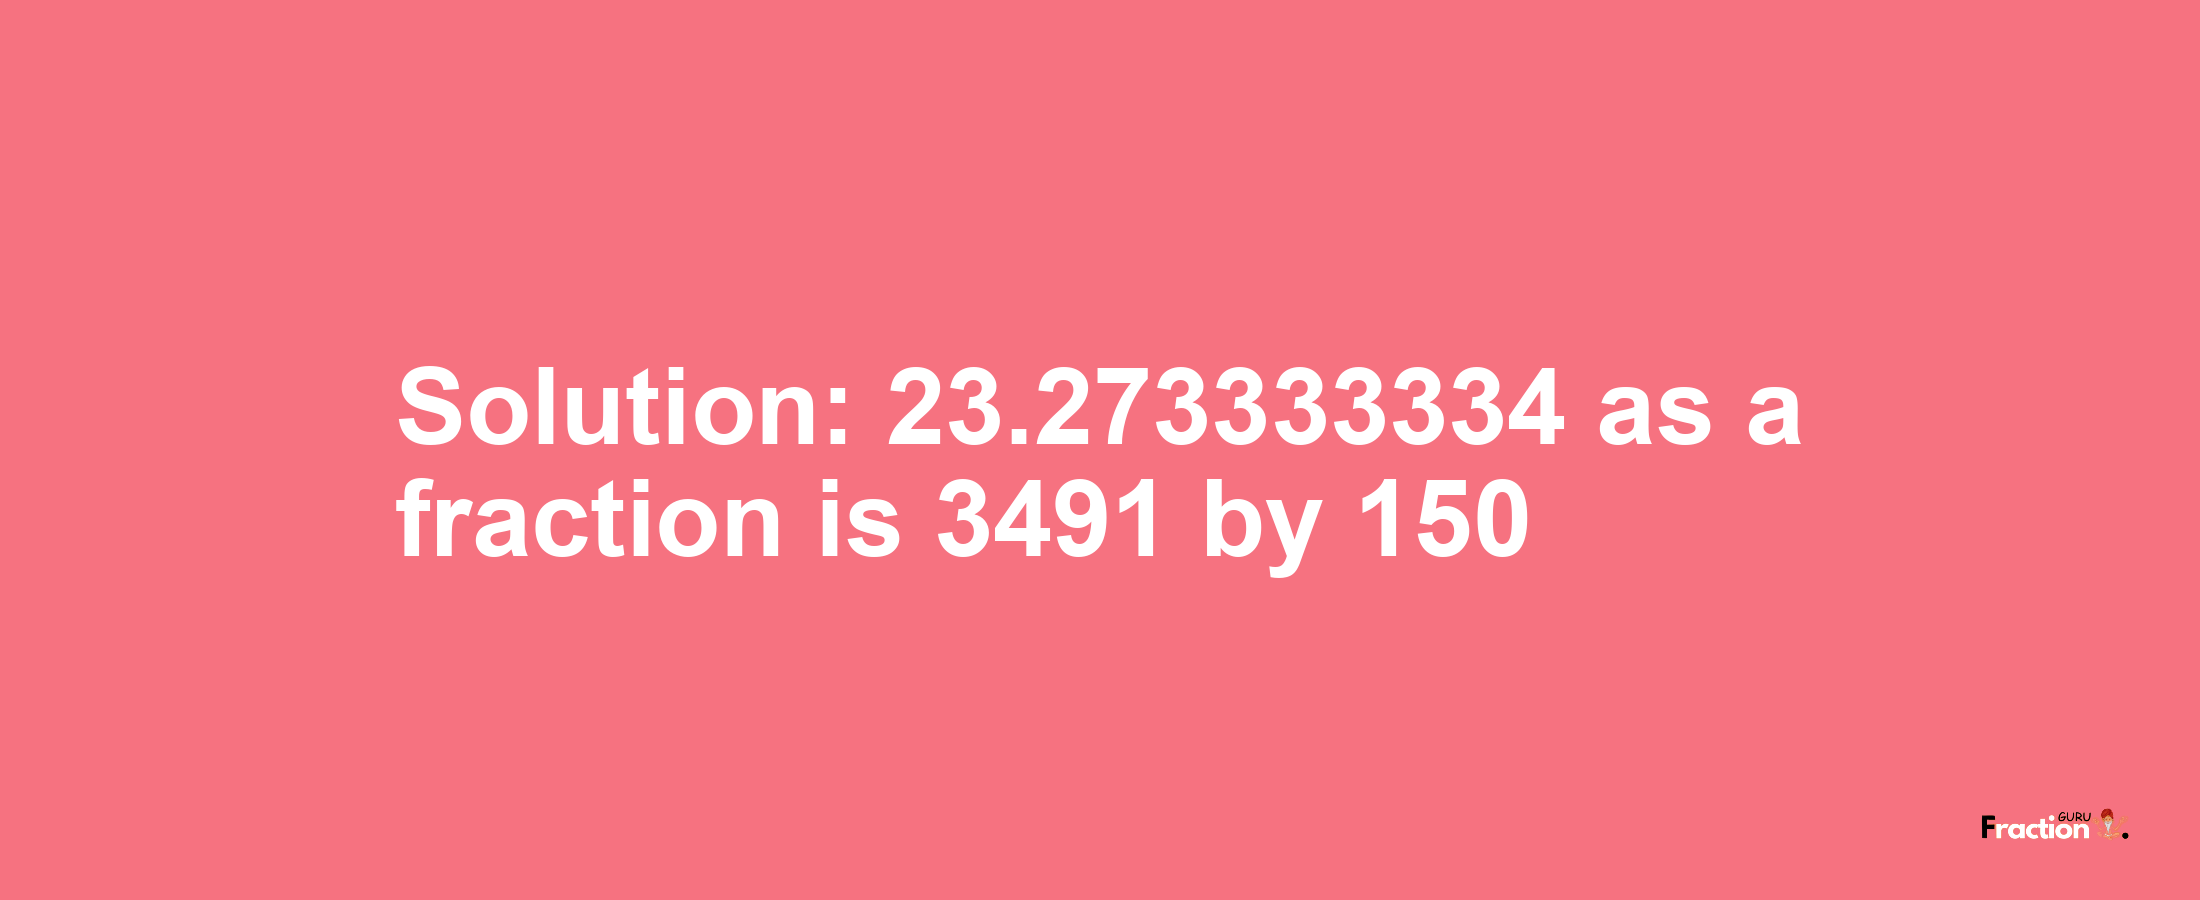 Solution:23.273333334 as a fraction is 3491/150